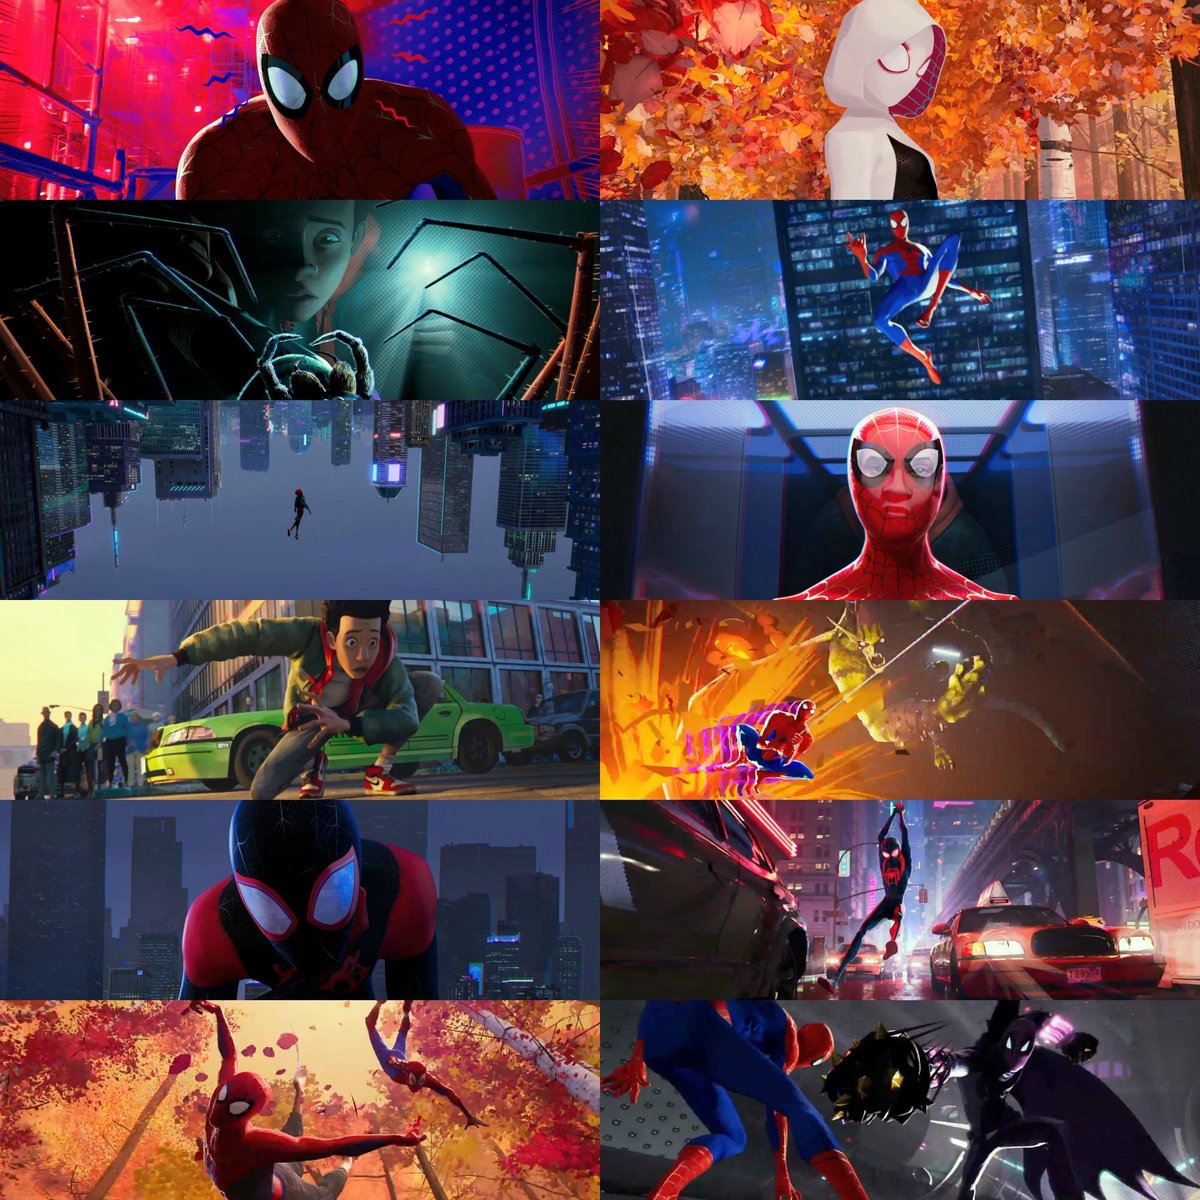 Rotten Tomatoes on Twitter: "The visuals in Spider-Man: Into the #